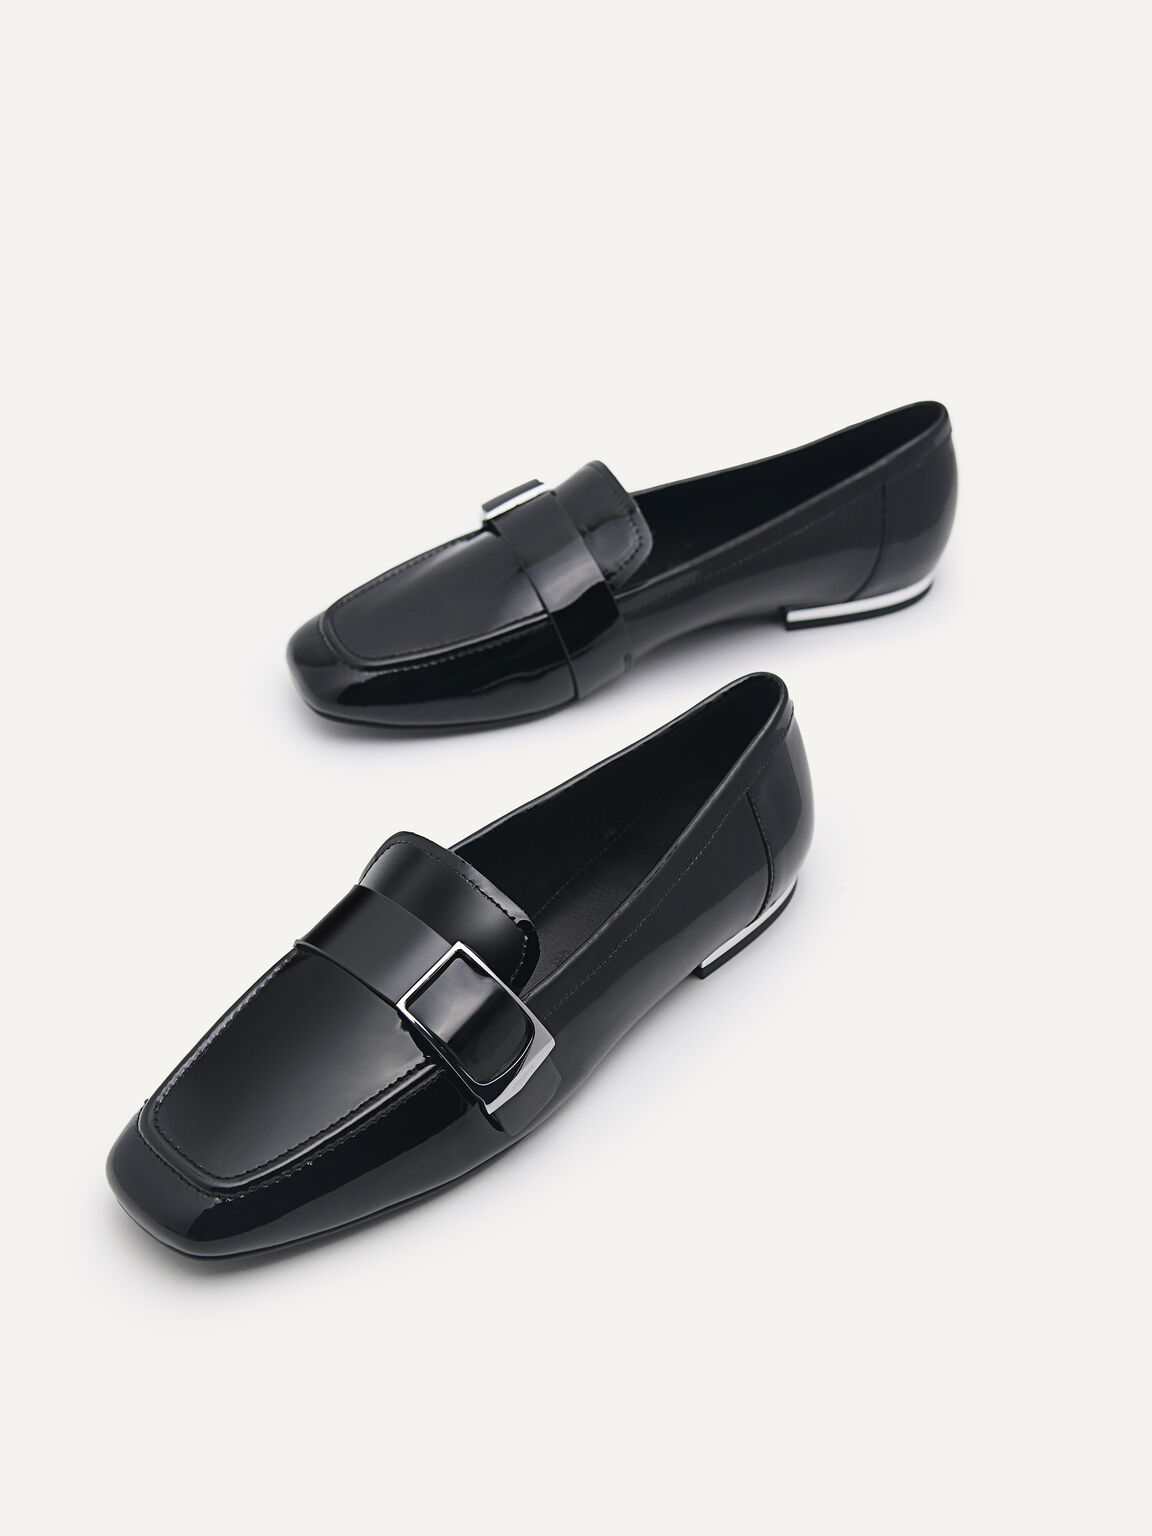 Patent Leather Loafers, Black, hi-res